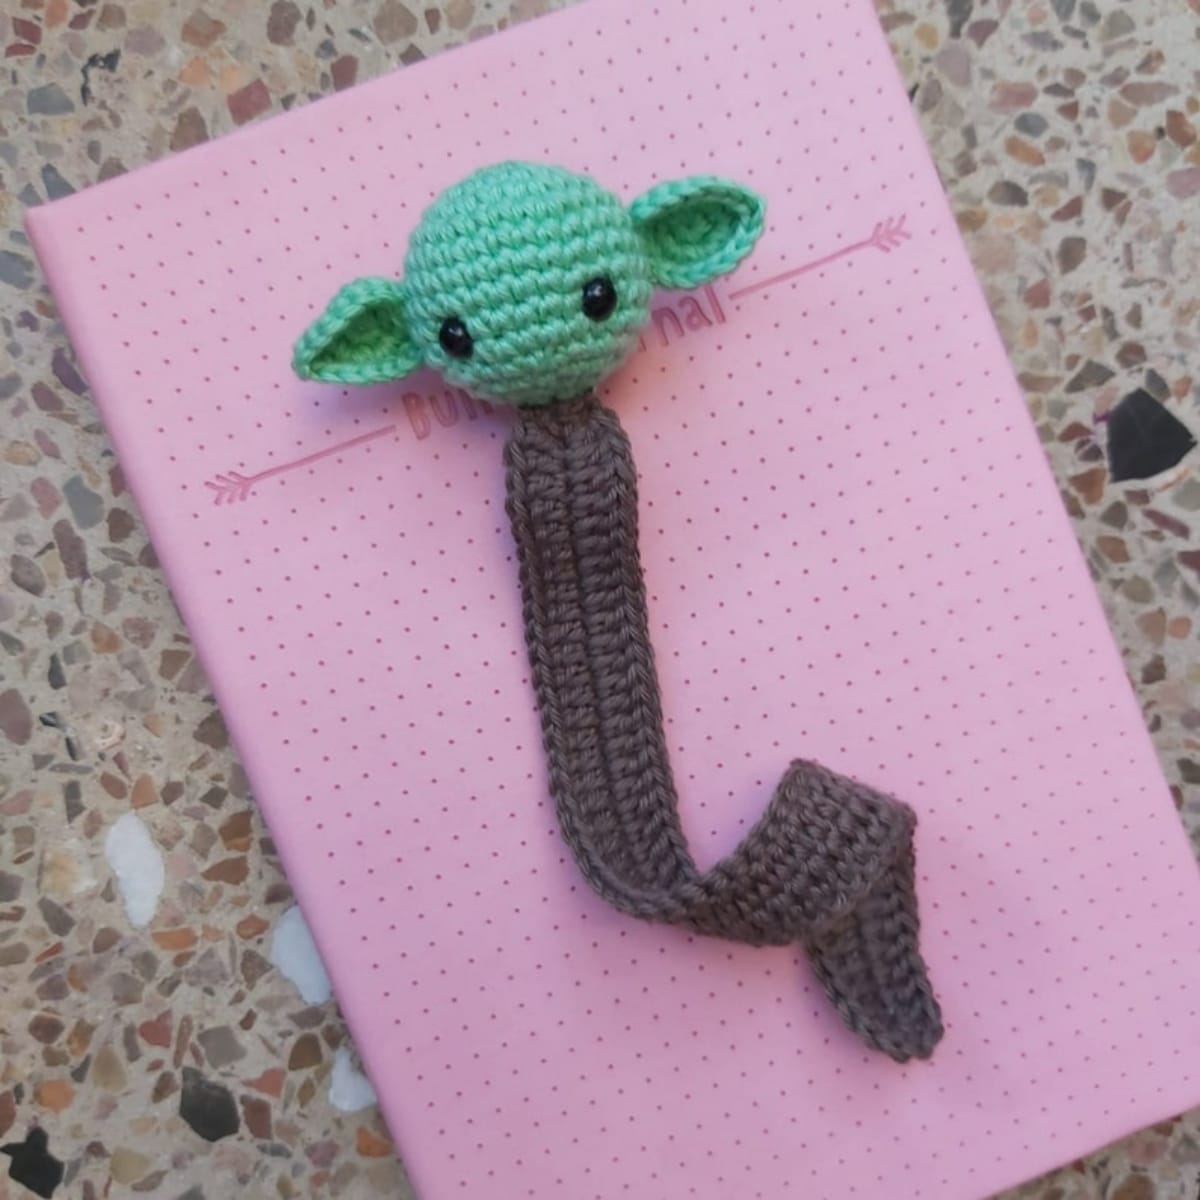 Dark brown crochet bookmark with a small green baby Yoda head at the top lying on a closed pink book.